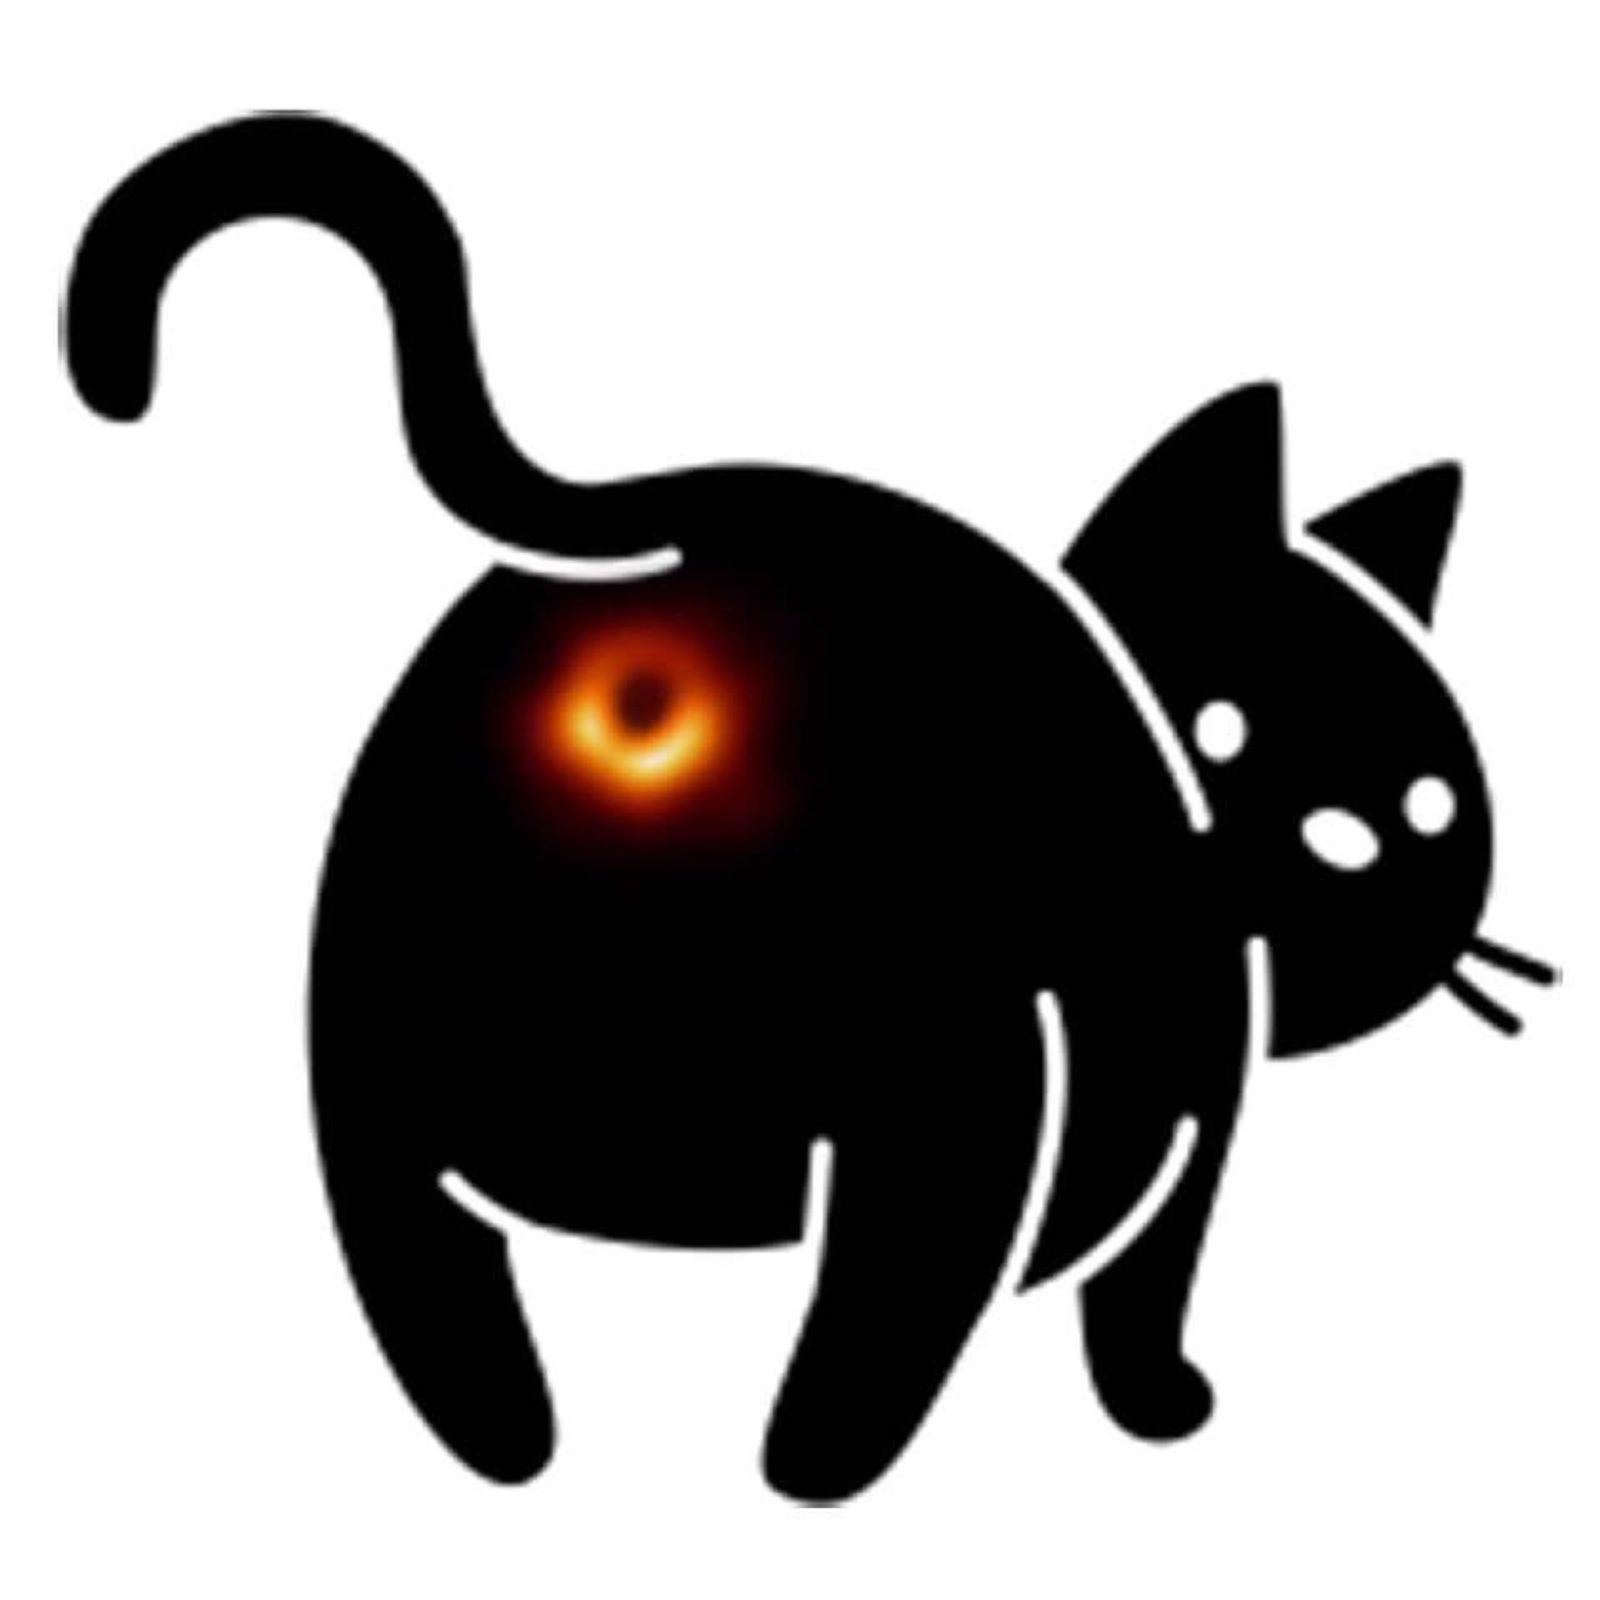 Best black hole memes Is it the Eye of Sauron A donut Your cats eye image 21